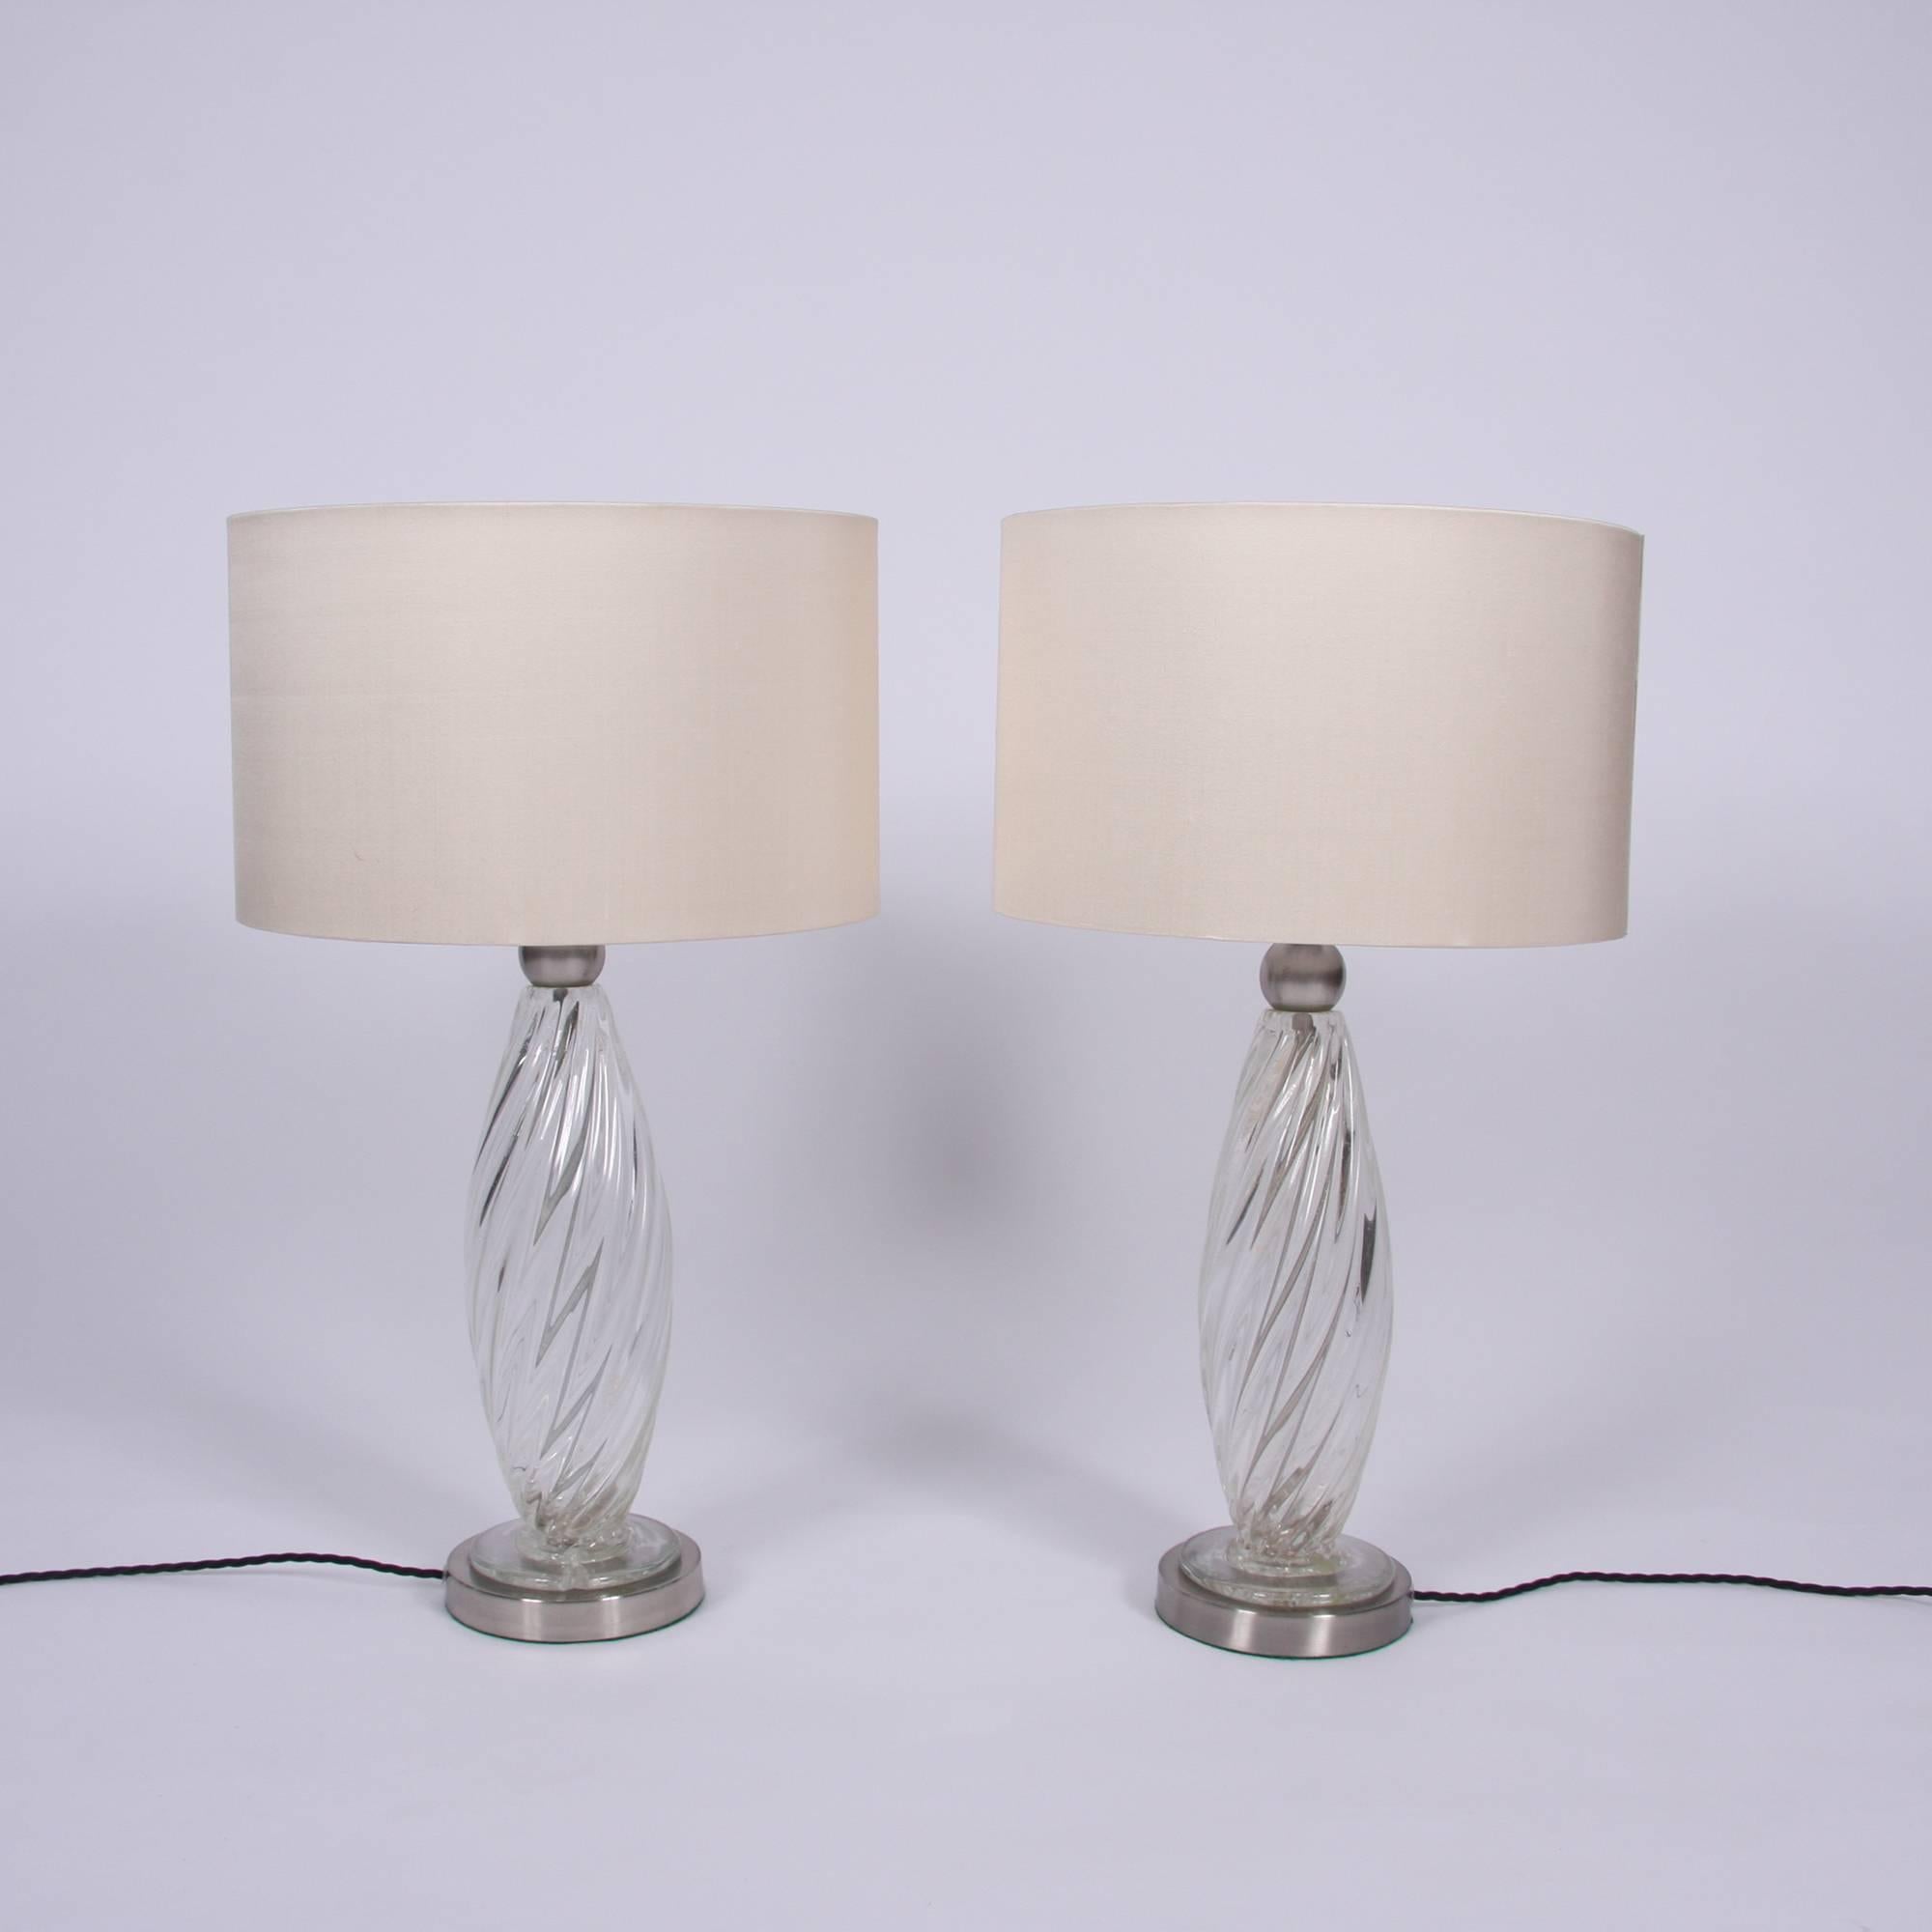 Pair of Murano table lamps

circa 1970, Italian

Slight imperfection consistent with age and manufacturing process 

Rewired and PAT tested.